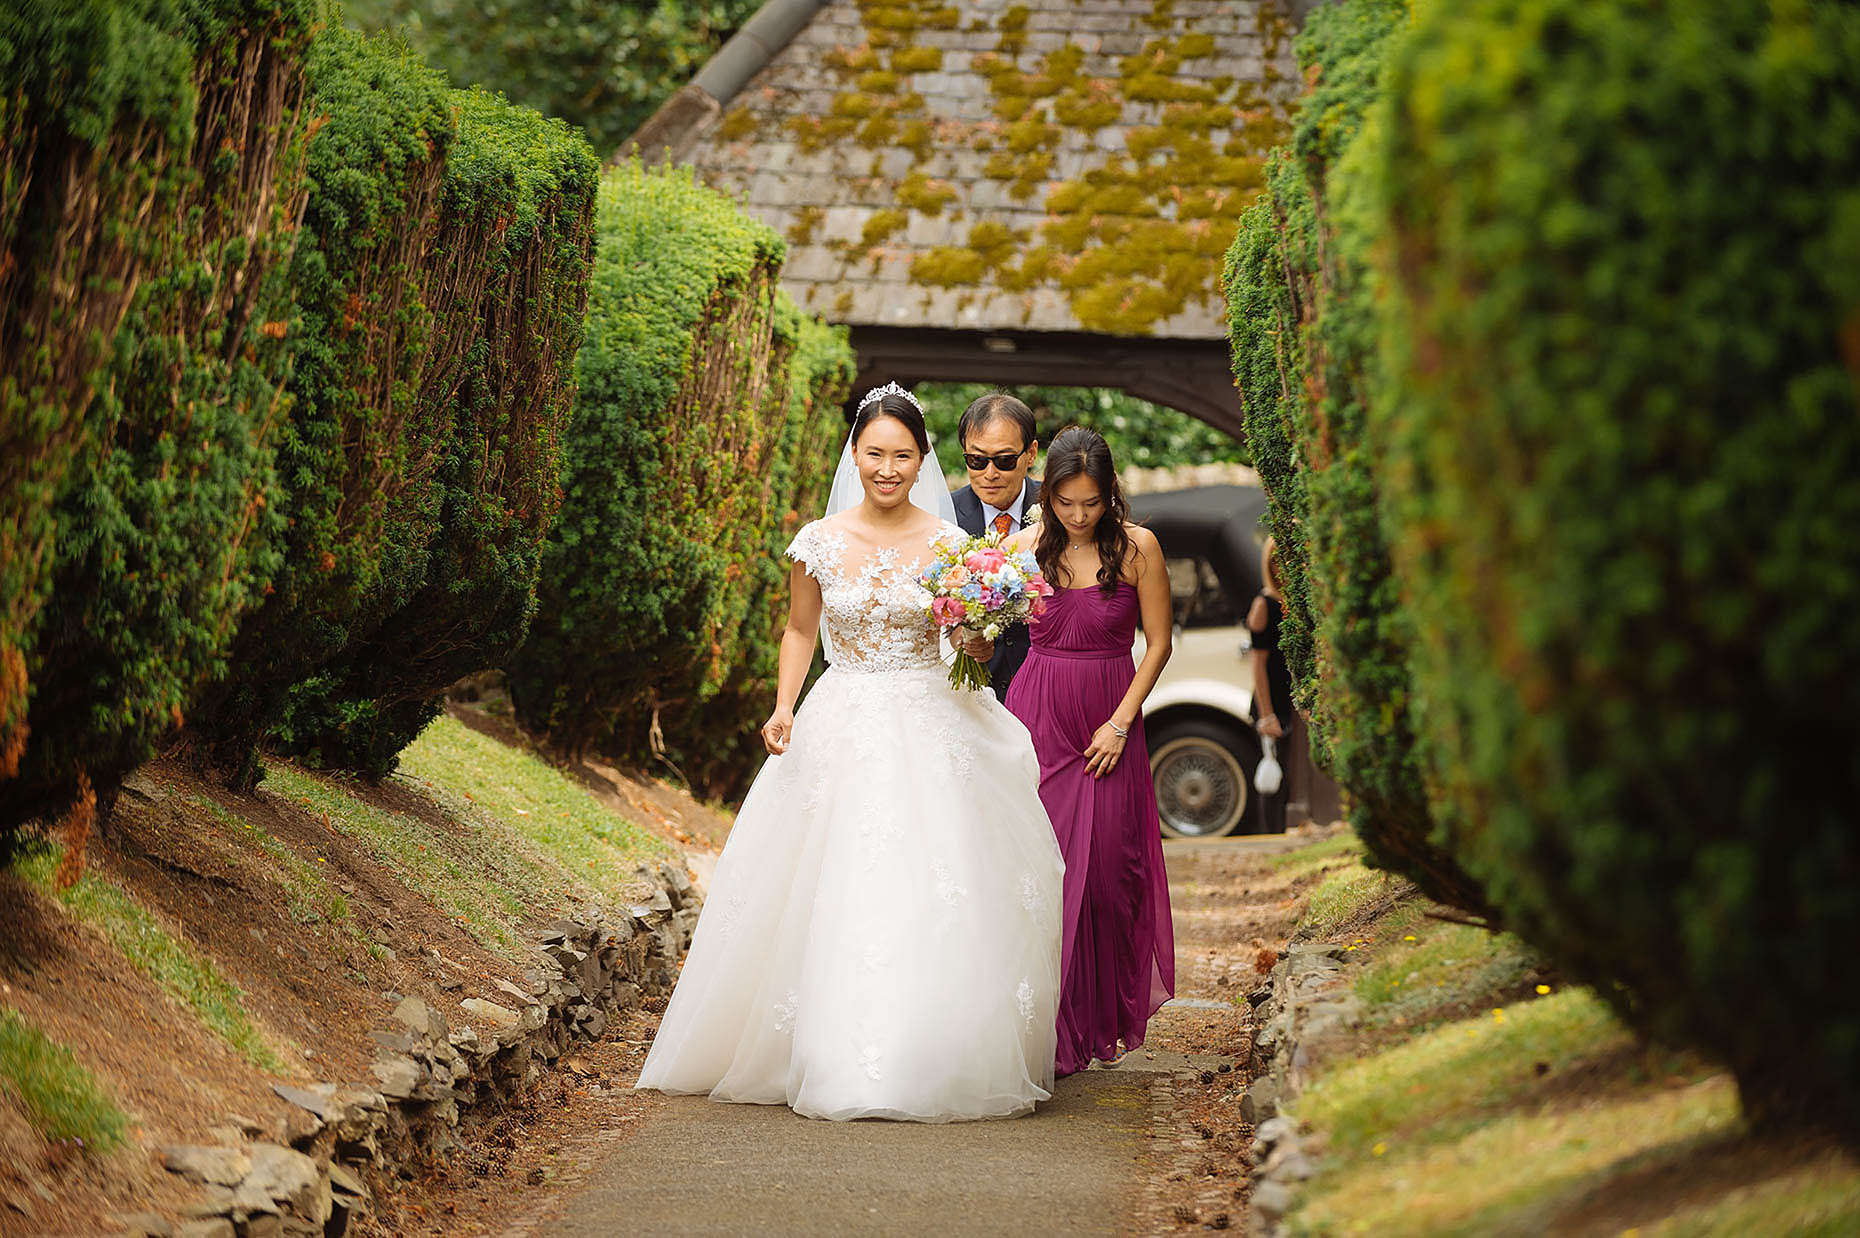 chay-felix-bride-arriving-church-leicestershire-wedding-photography-06